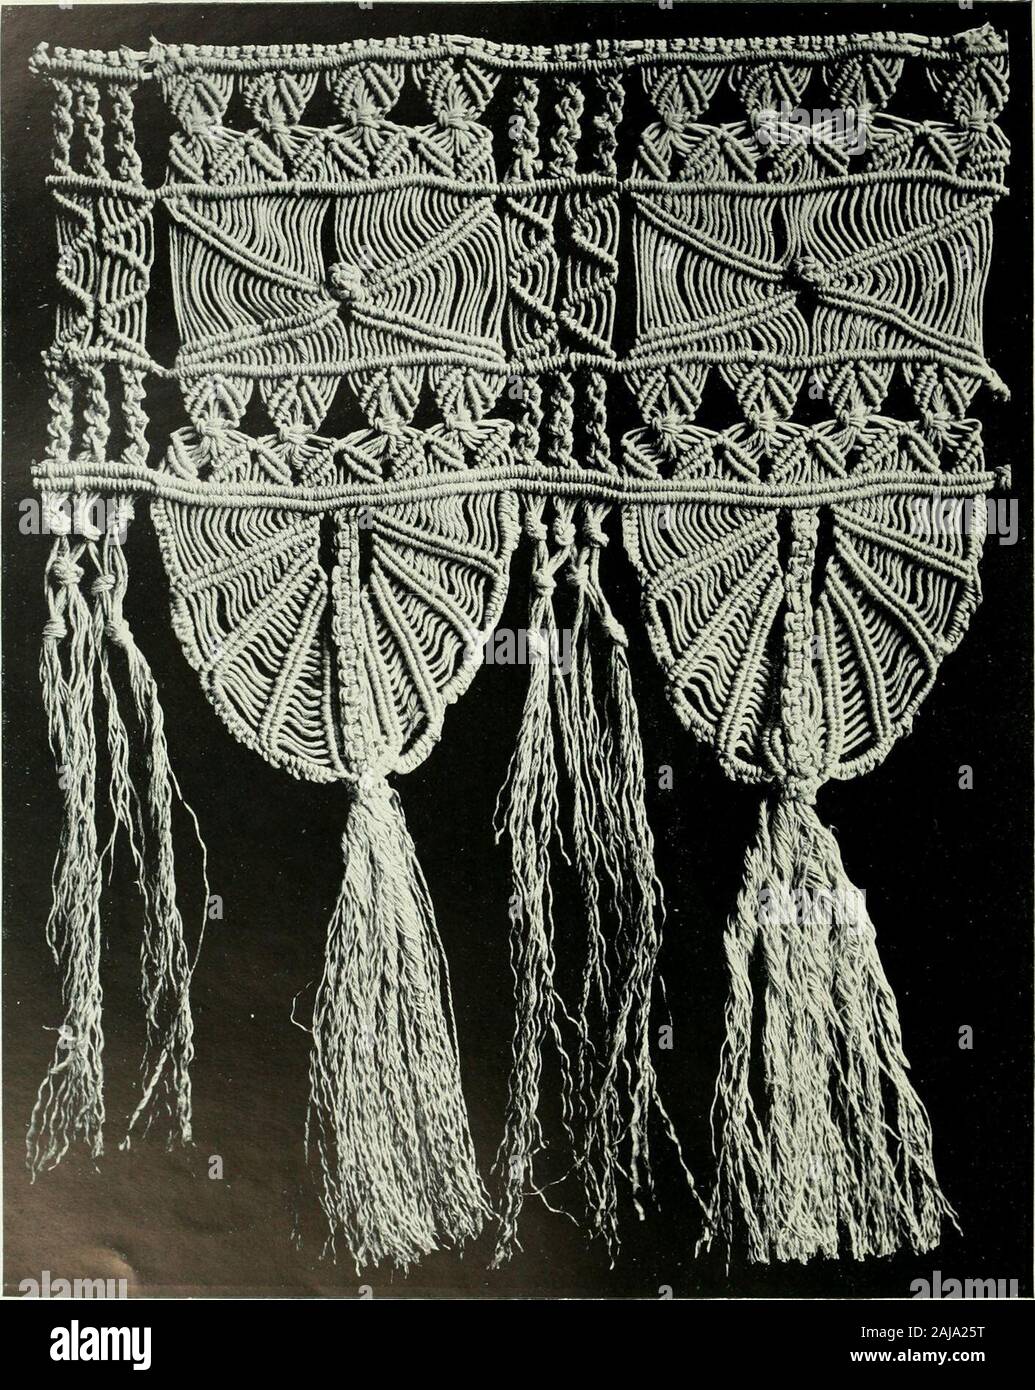 Seven centuries of lace . Plate LXXXl. THREE SPECIMENS OF EARLY IRISH NEEDLE-POINT LACE No. I has a tape introduced. No. 3 is the so-called Carrickmacross lace (first made about 1848) Together 6 ft. About 1848. Plate LXXXII. SPECIMEN UF KNOTTED AND TWISTED STRING OR THREAD WORK, CALLED MACRAME This sort of work is often madi- by knotting; the frayr-d ends on the edge of a woven material, or else separately by knottingstrings or cords of linen or silk, the ends of which are fastened to a small cushion or pillow, but bobbins are not used iu this work. lo in. x 12 in. Italian, iSth century Stock Photo